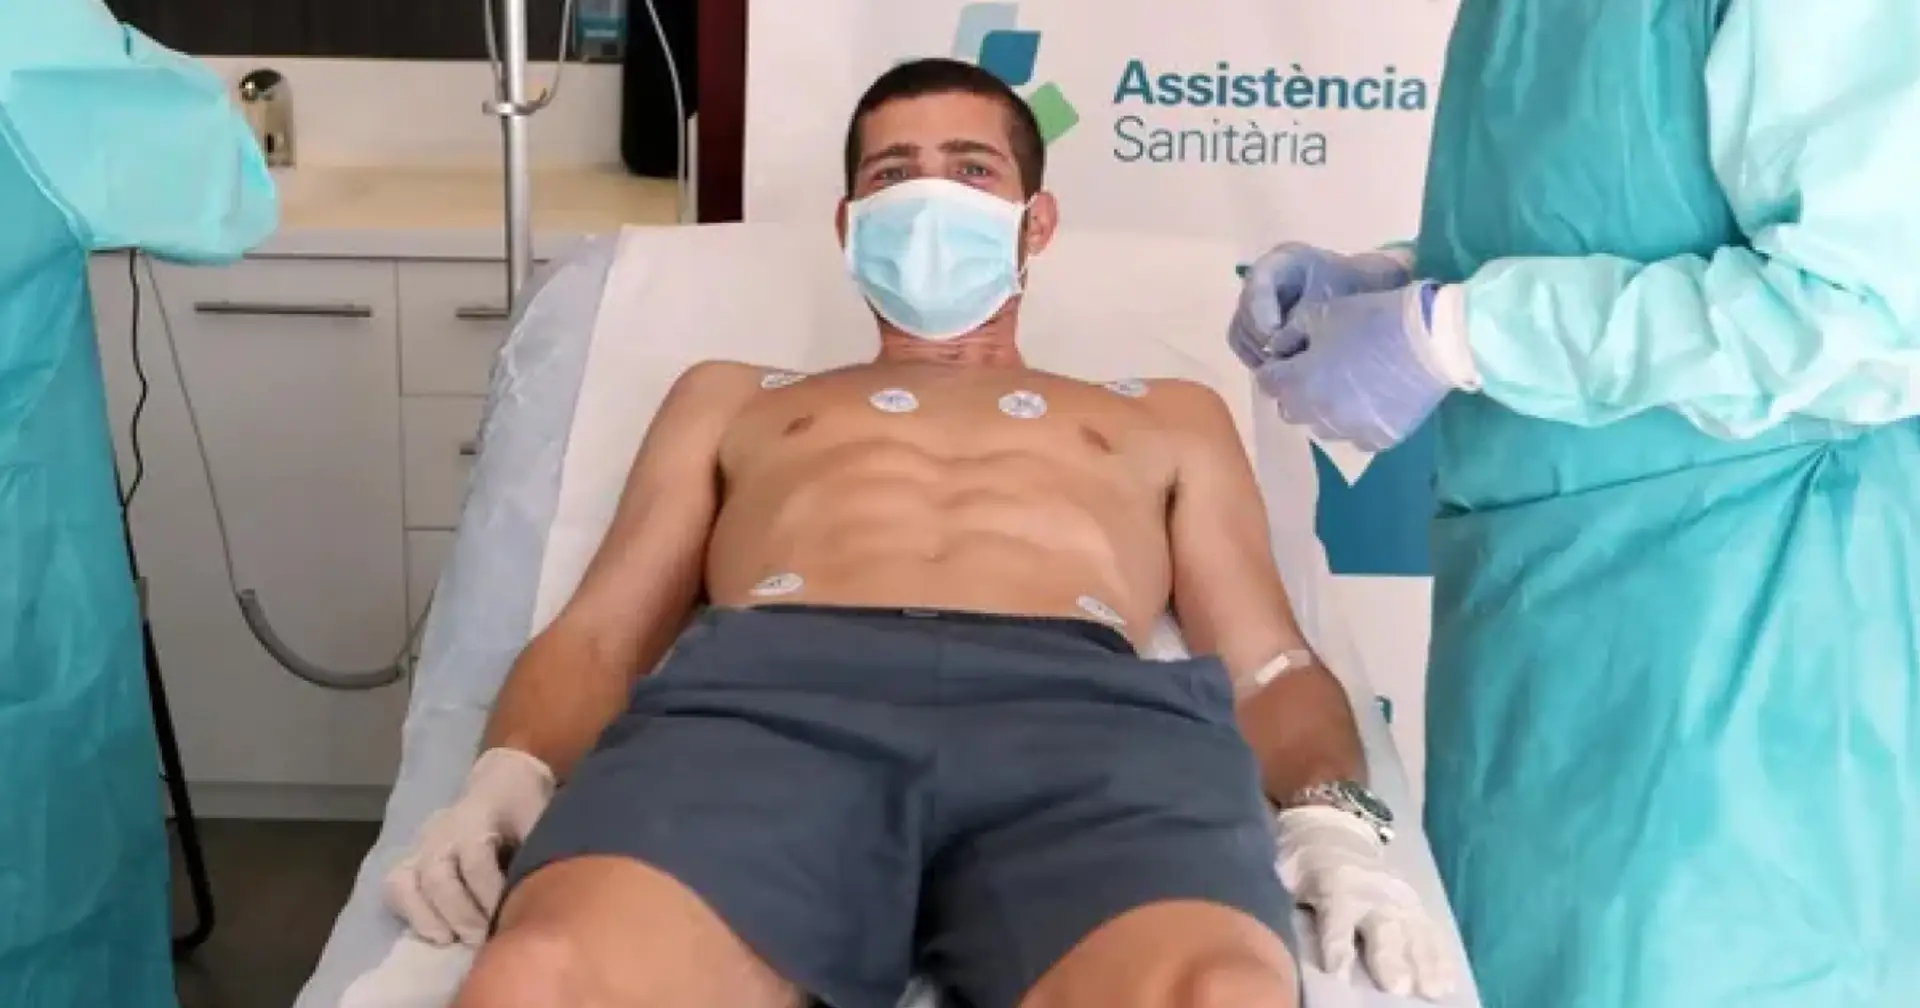 Barca player undergoes surgery on New Year's Day